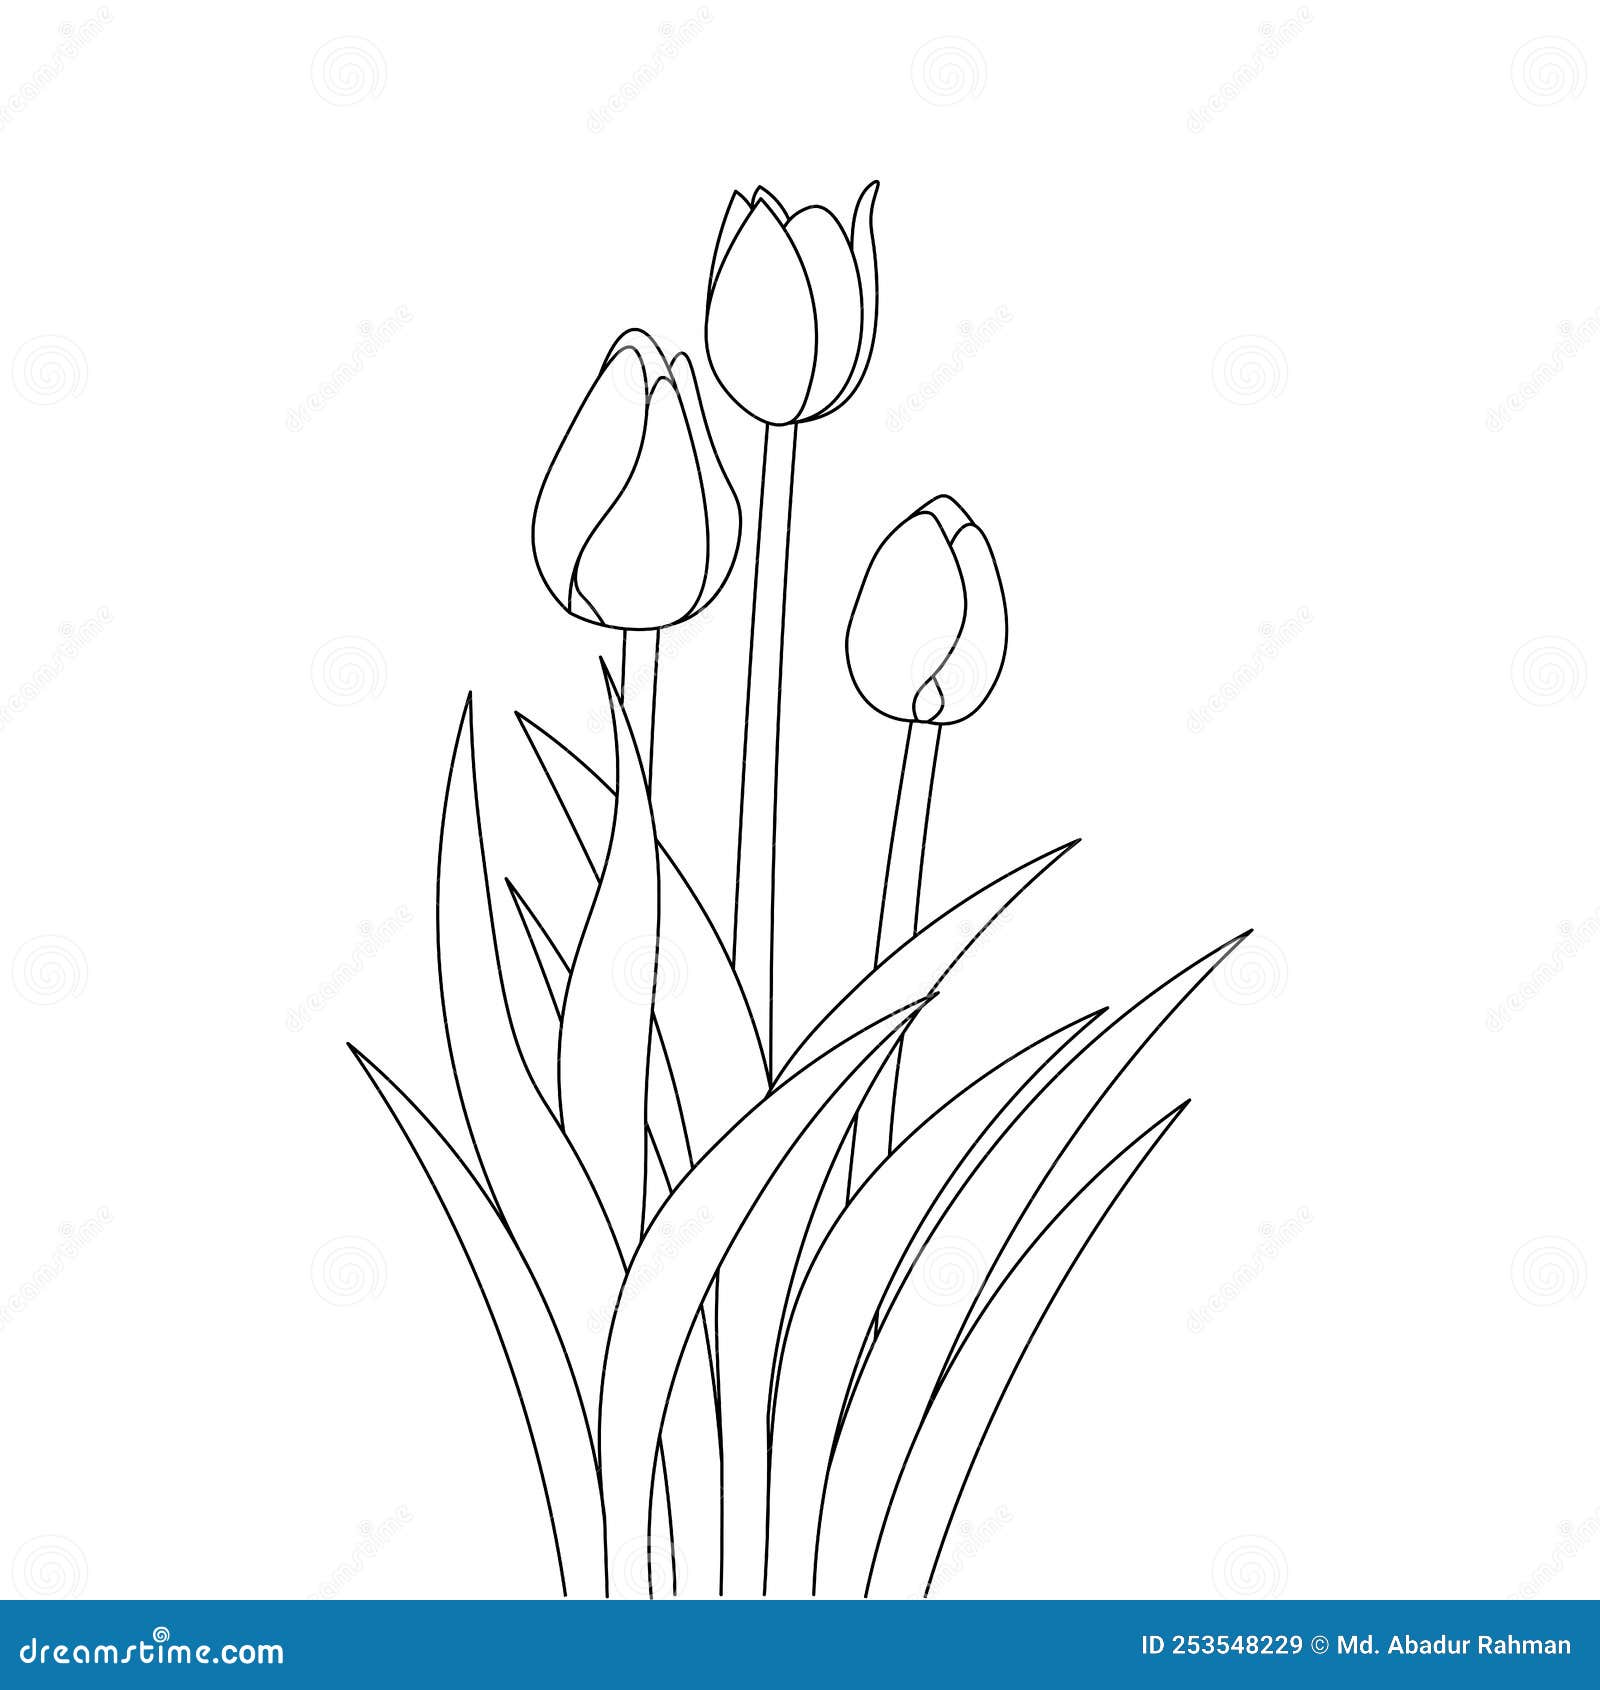 Tulip line art flower coloring page design for printing template continuous black stroke stock vector